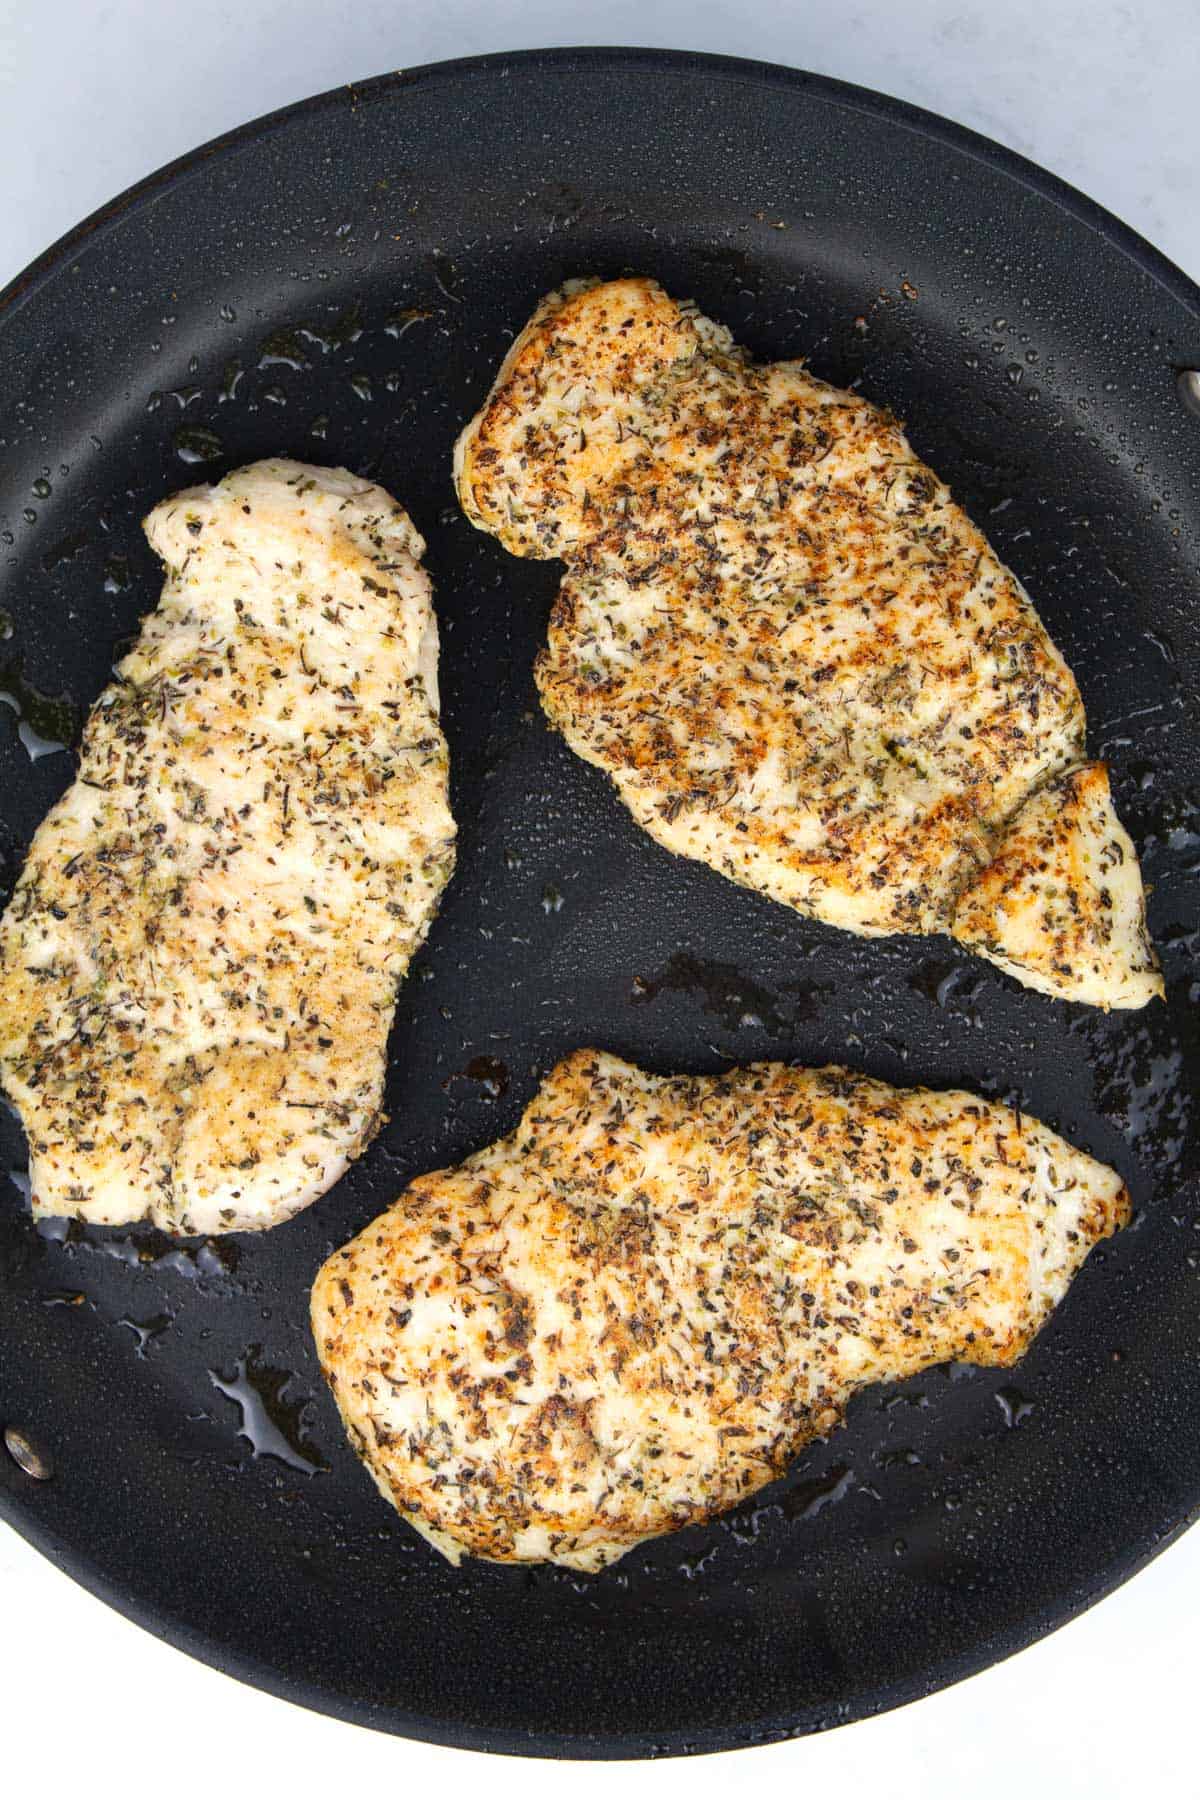 Overhead view of a black skillet with three thin chicken breasts searing.